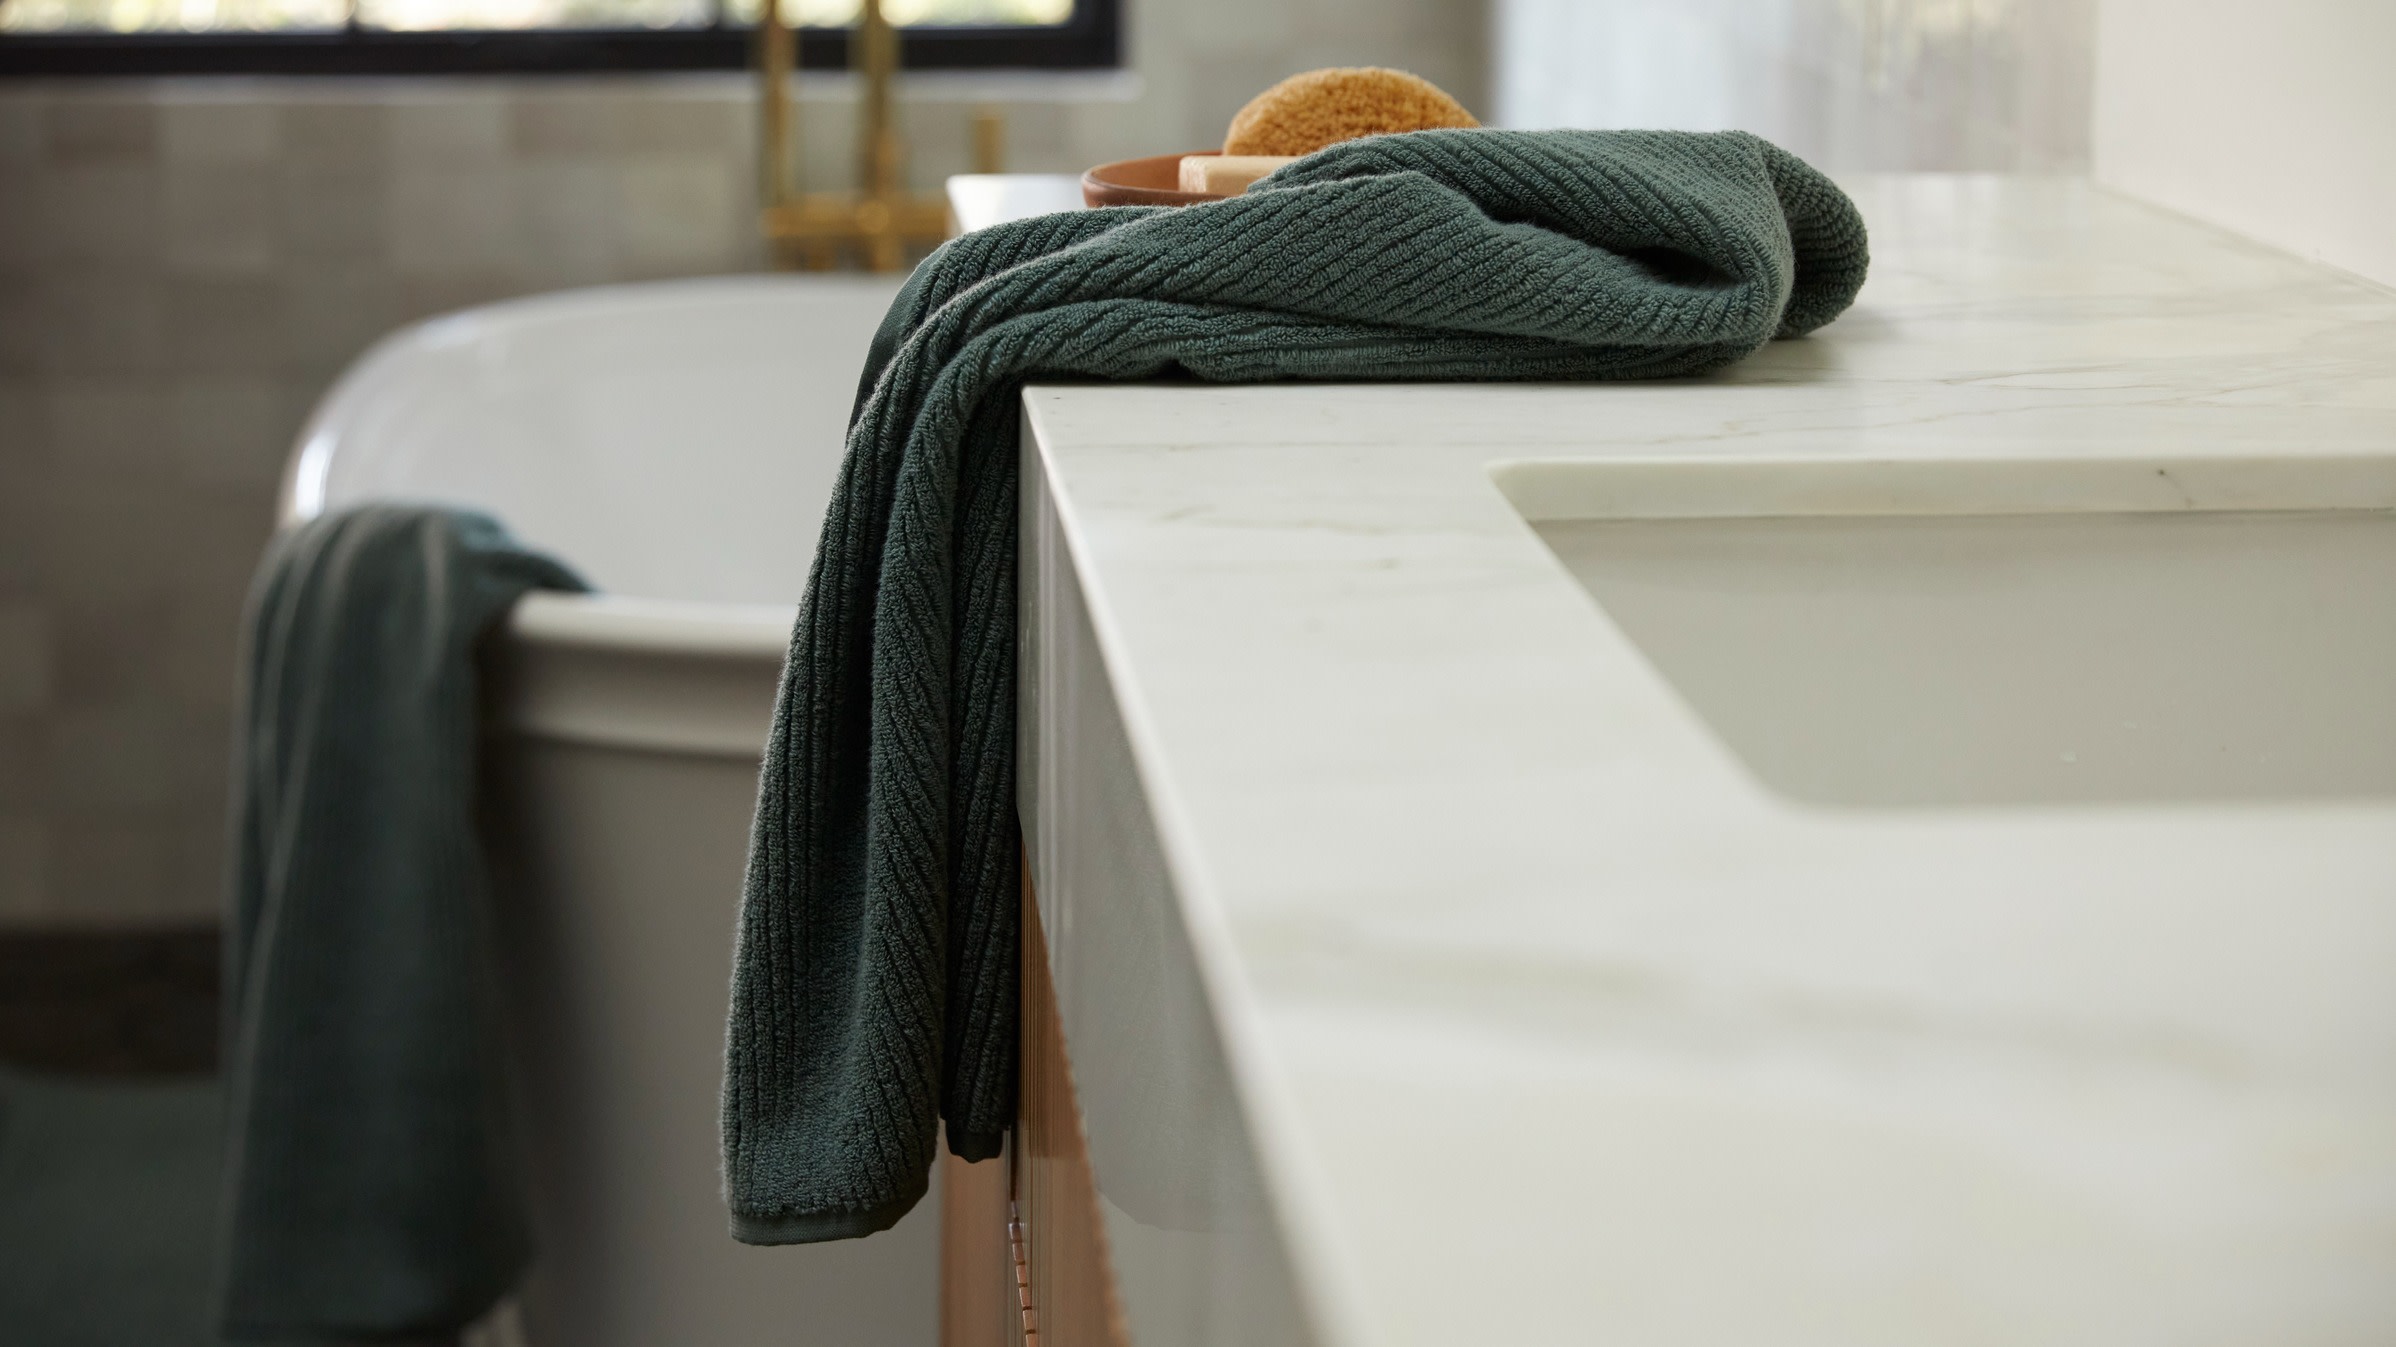 An agave-green soft rib towel draped over the side of a marble bathroom counter